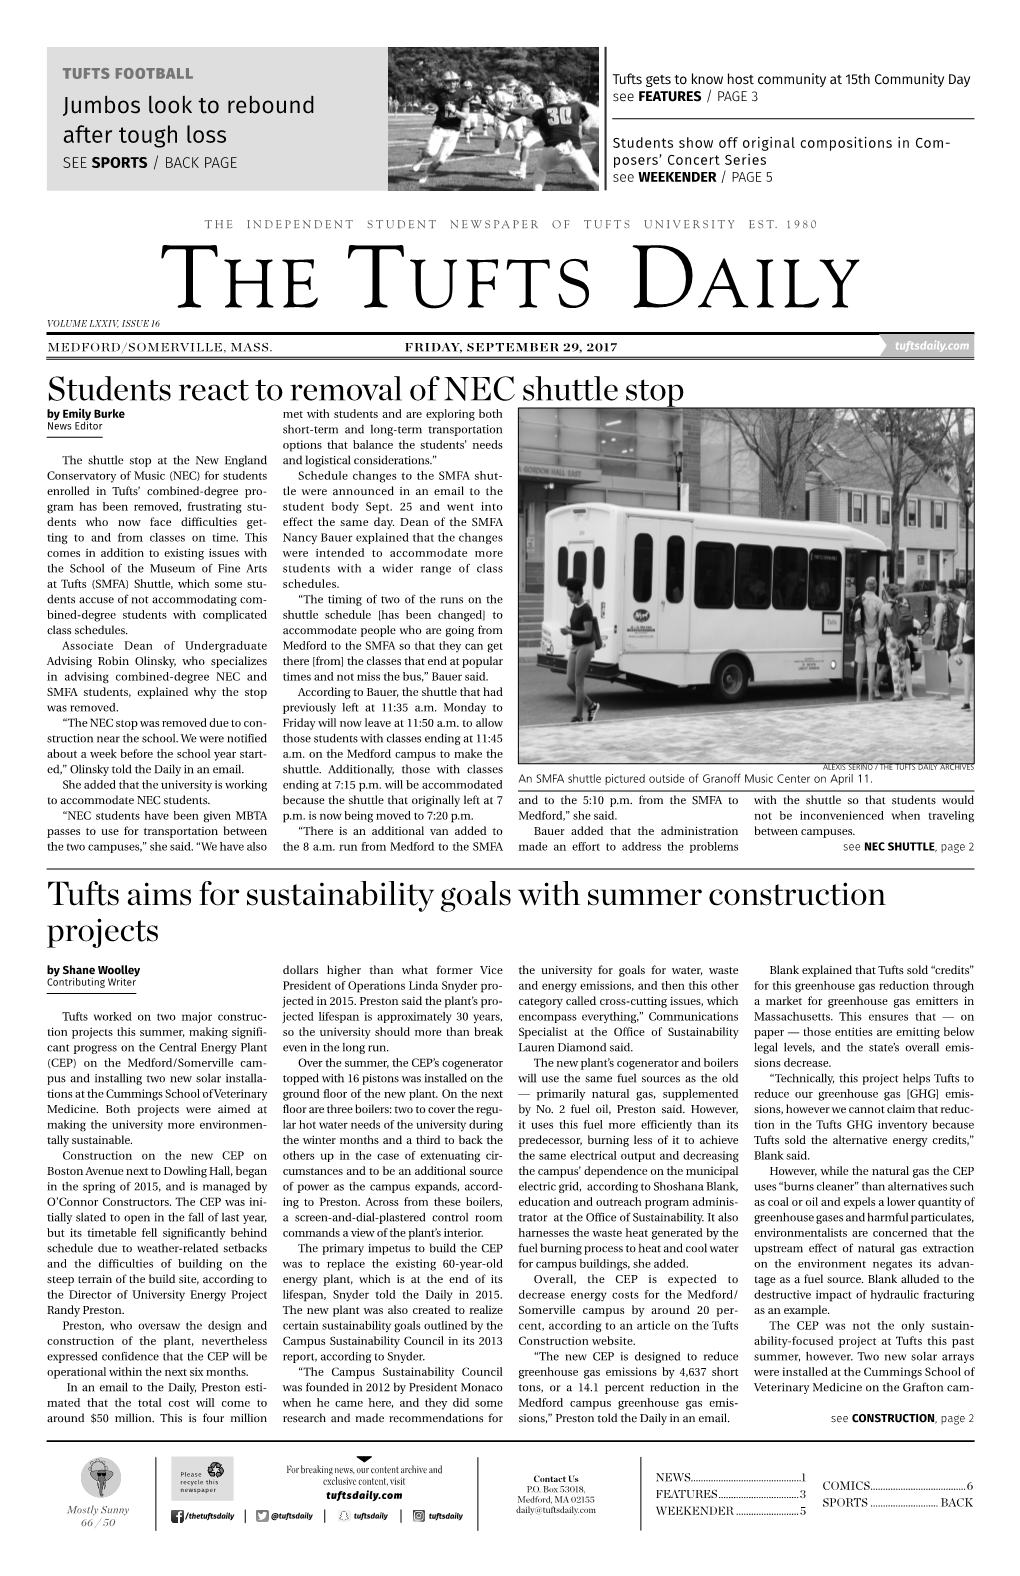 The Tufts Daily Volume Lxxiv, Issue 16